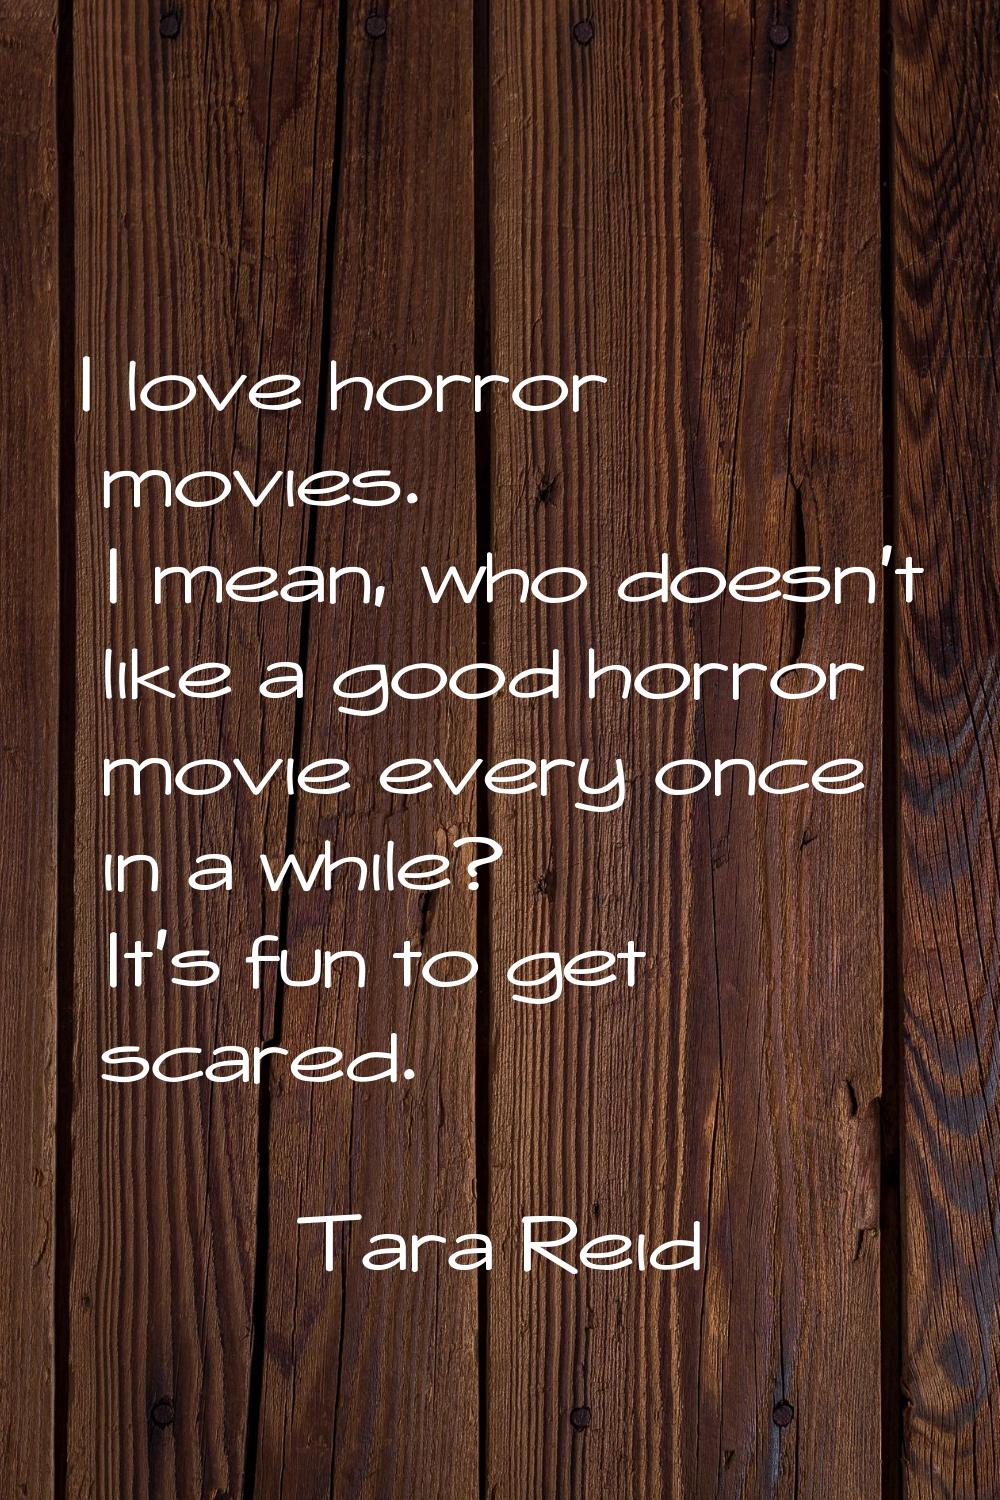 I love horror movies. I mean, who doesn't like a good horror movie every once in a while? It's fun 